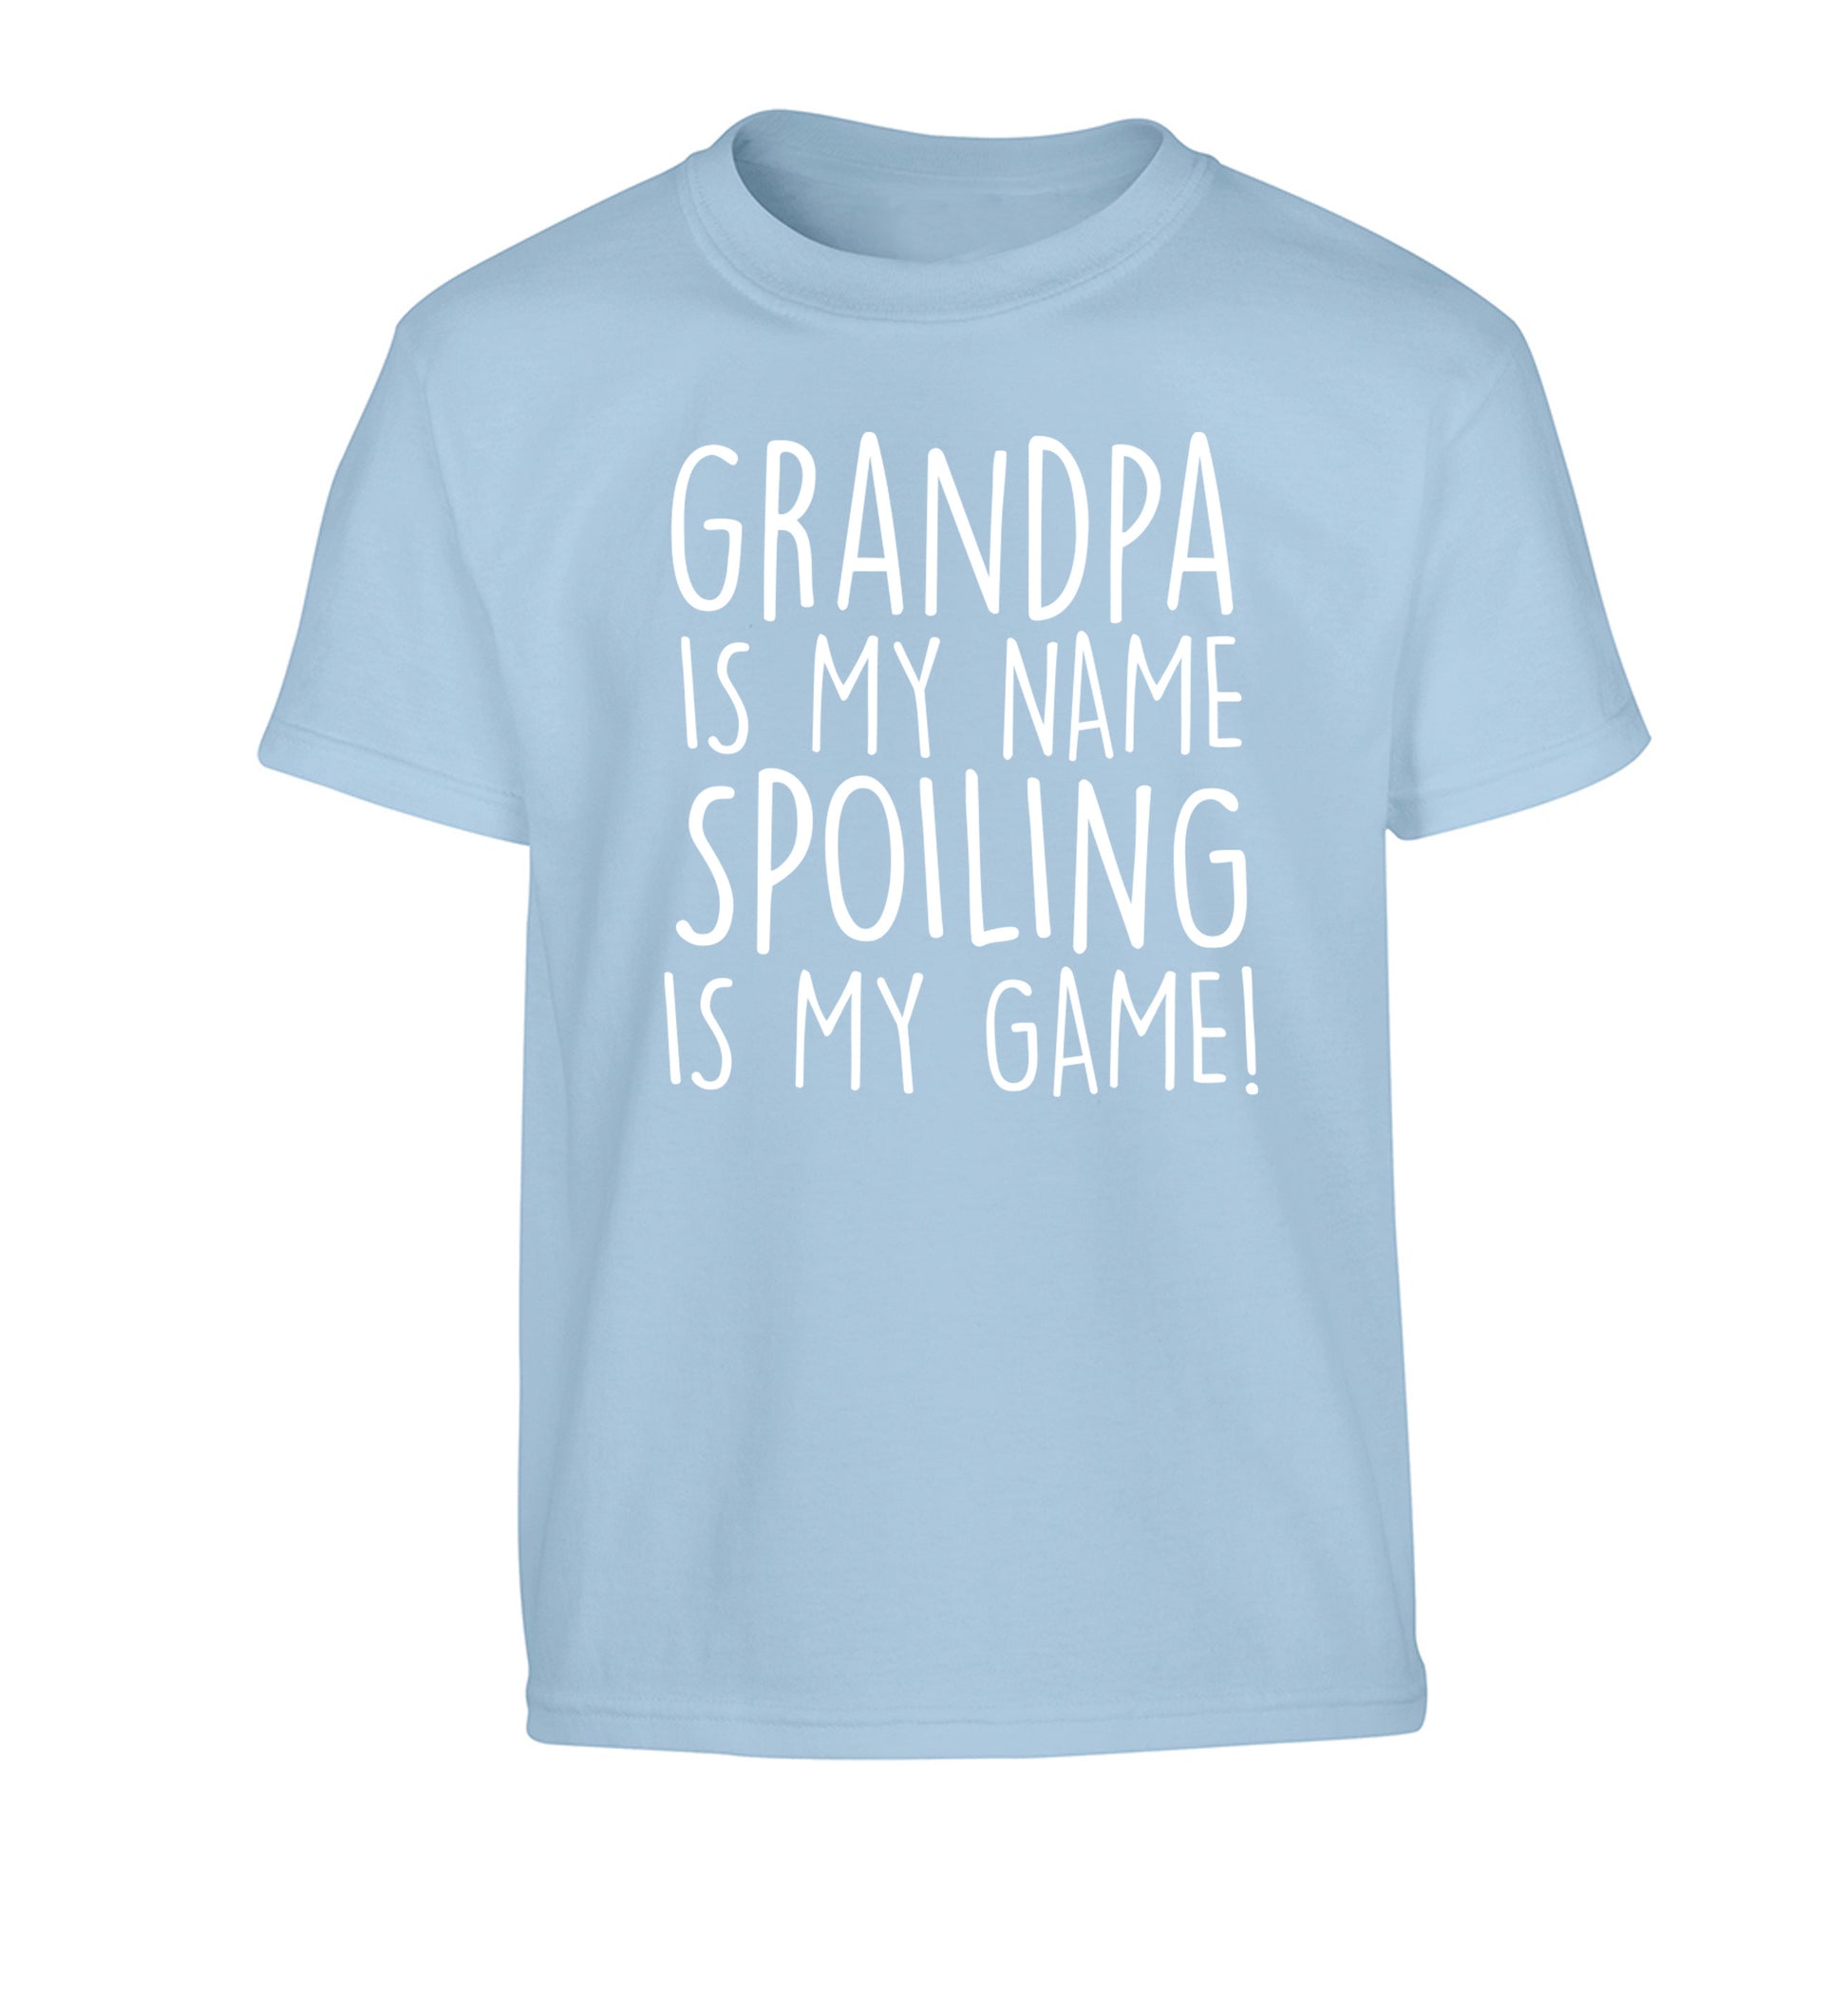 Grandpa is my name, spoiling is my game Children's light blue Tshirt 12-14 Years